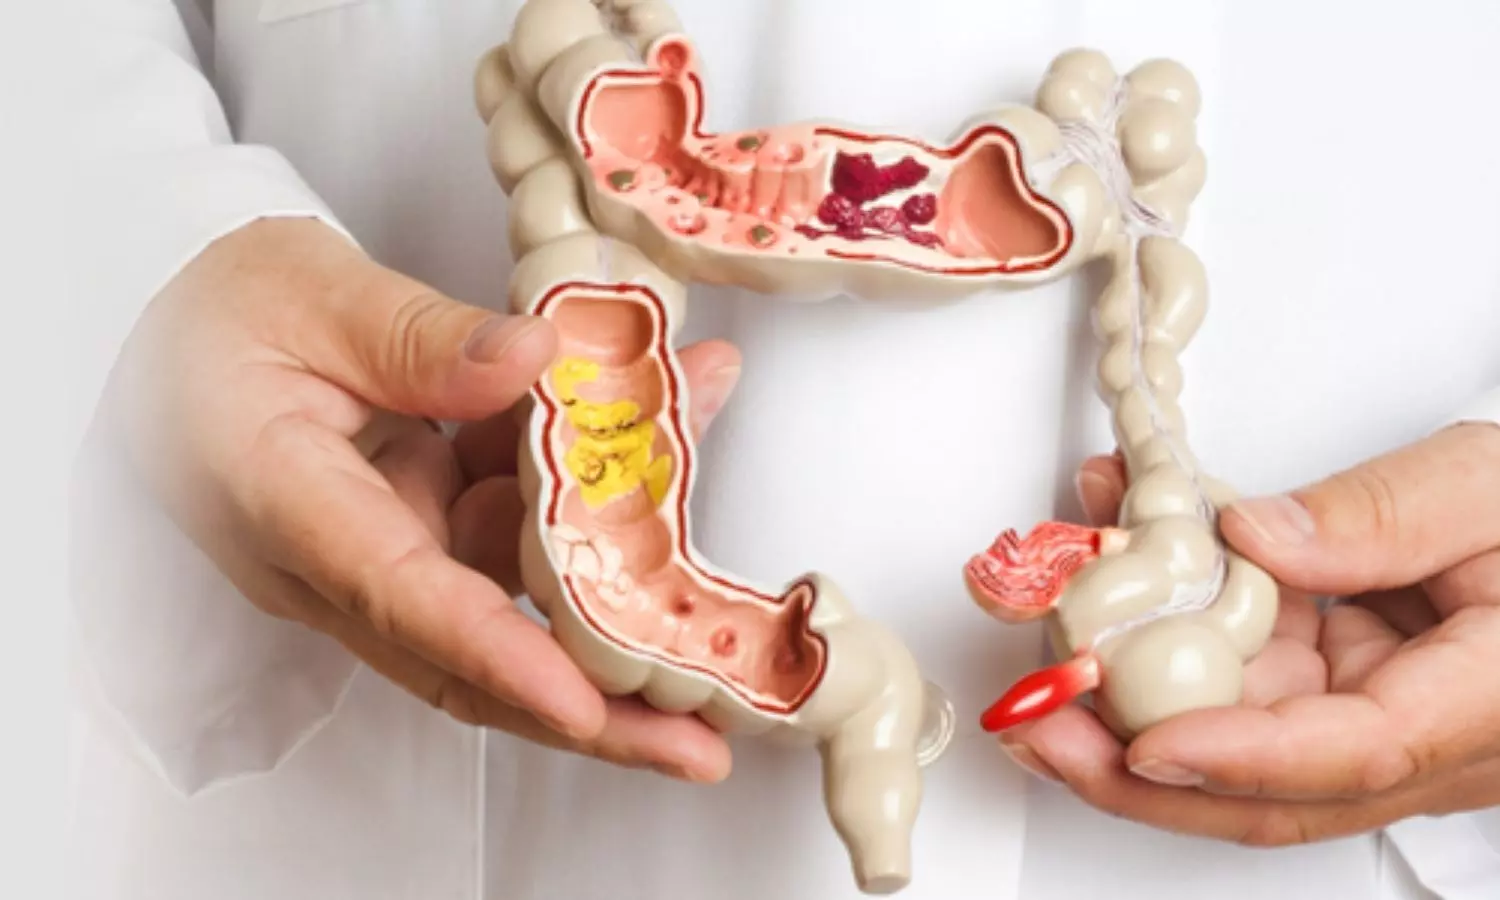 Oral plus IV antibiotic reduces SSIs by more than 50 pc in patients undergoing colorectal surgery: JAMA